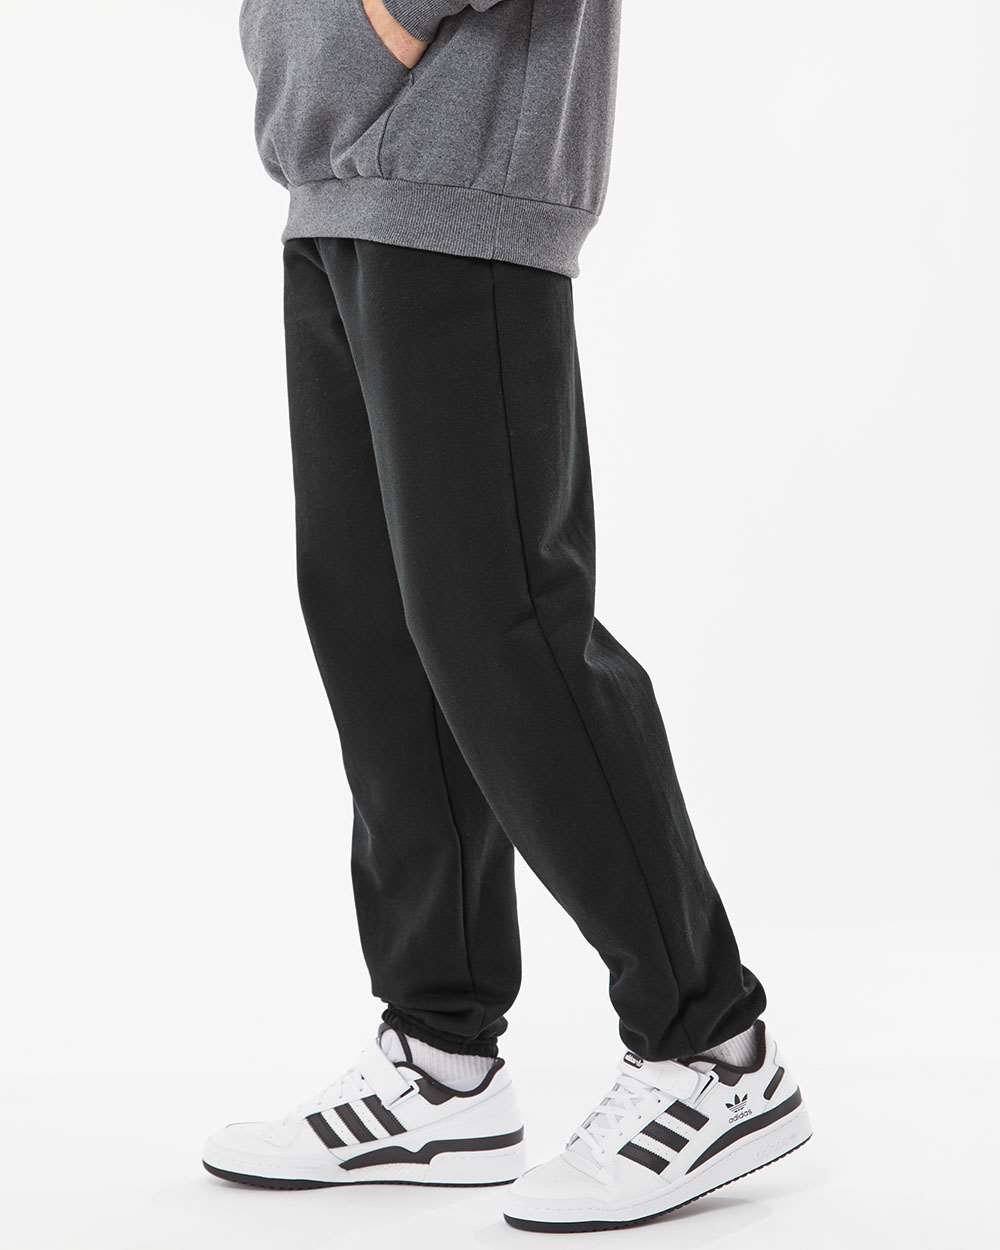 King Fashion KF9012 - Pocketed Sweatpants with Elastic Cuffs